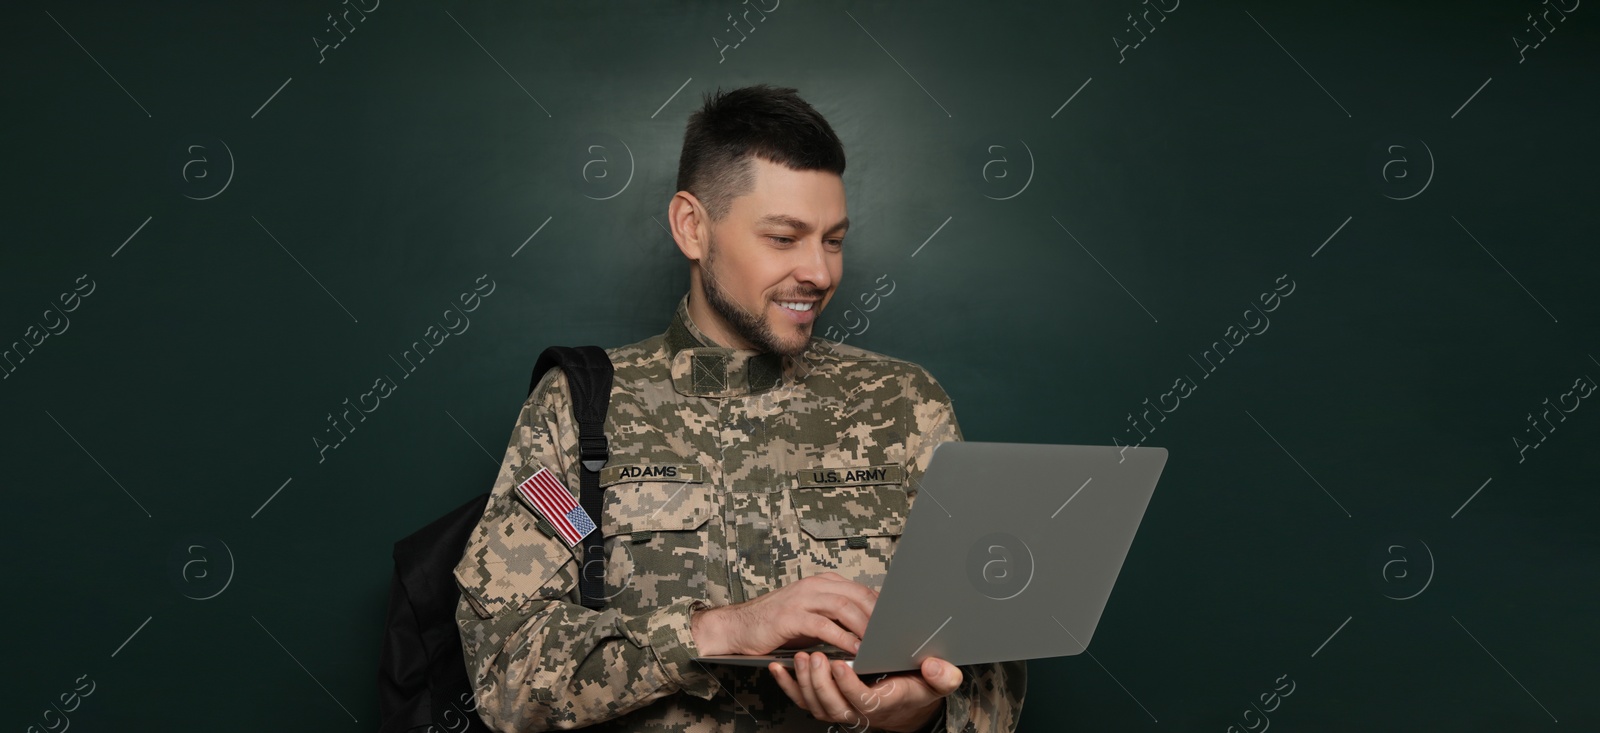 Image of Military education. Cadet with backpack and laptop near green chalkboard